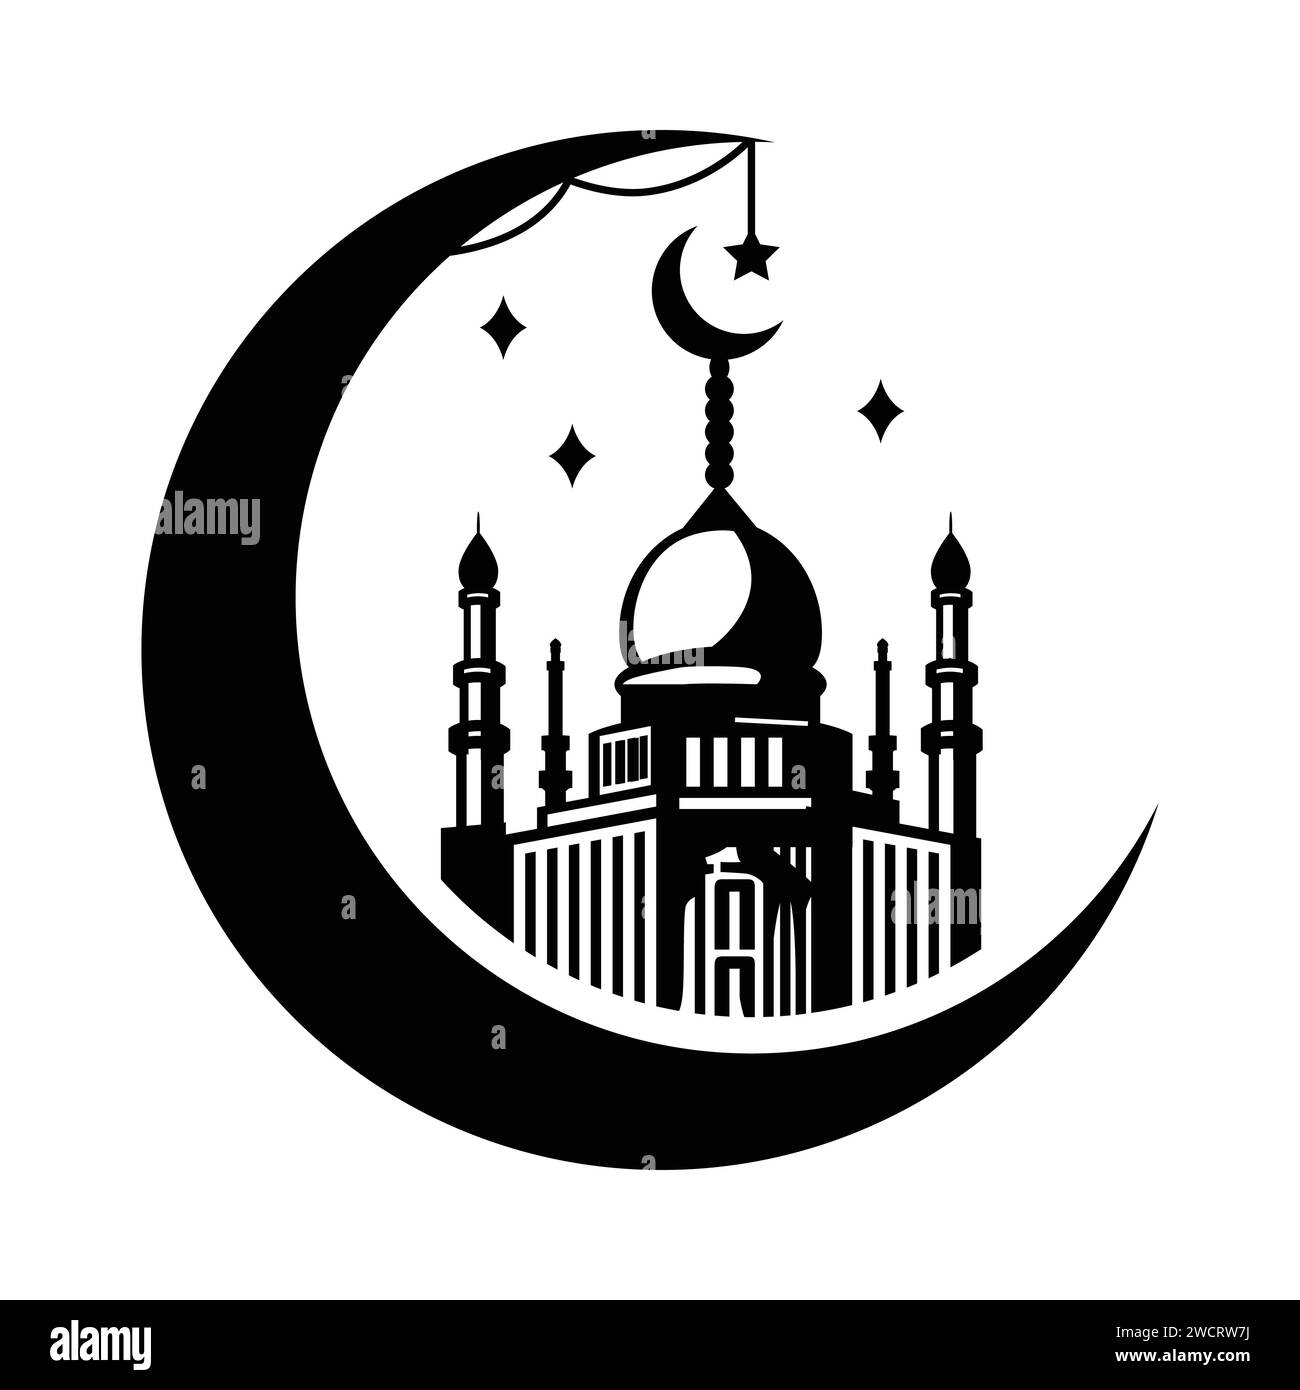 Mosque and crescent moon, hand drawn vector illustration design, isolated on crescent moon and lantern design. Stock Vector